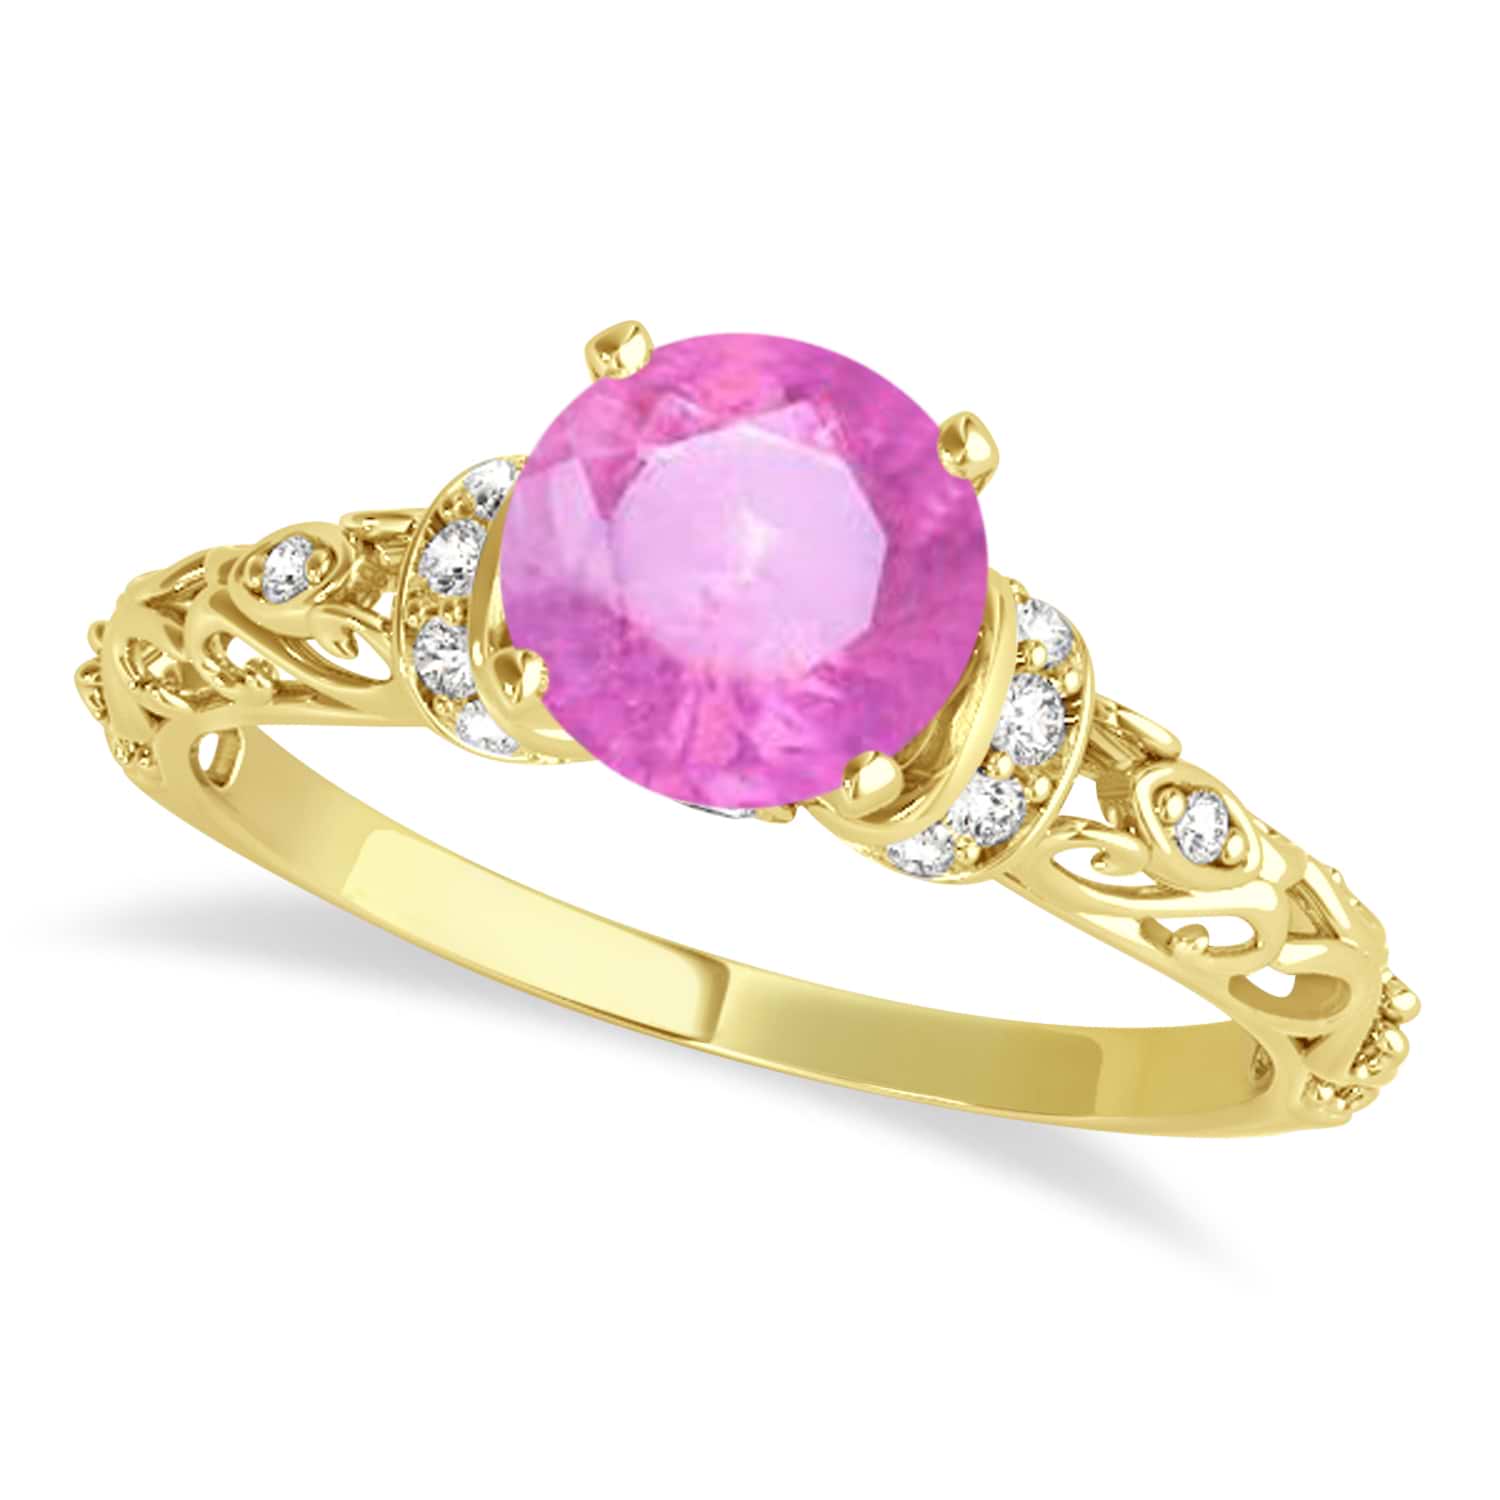 Pink Sapphire Diamond Antique Engagement Ring 18k Yellow Gold (1.12ct)